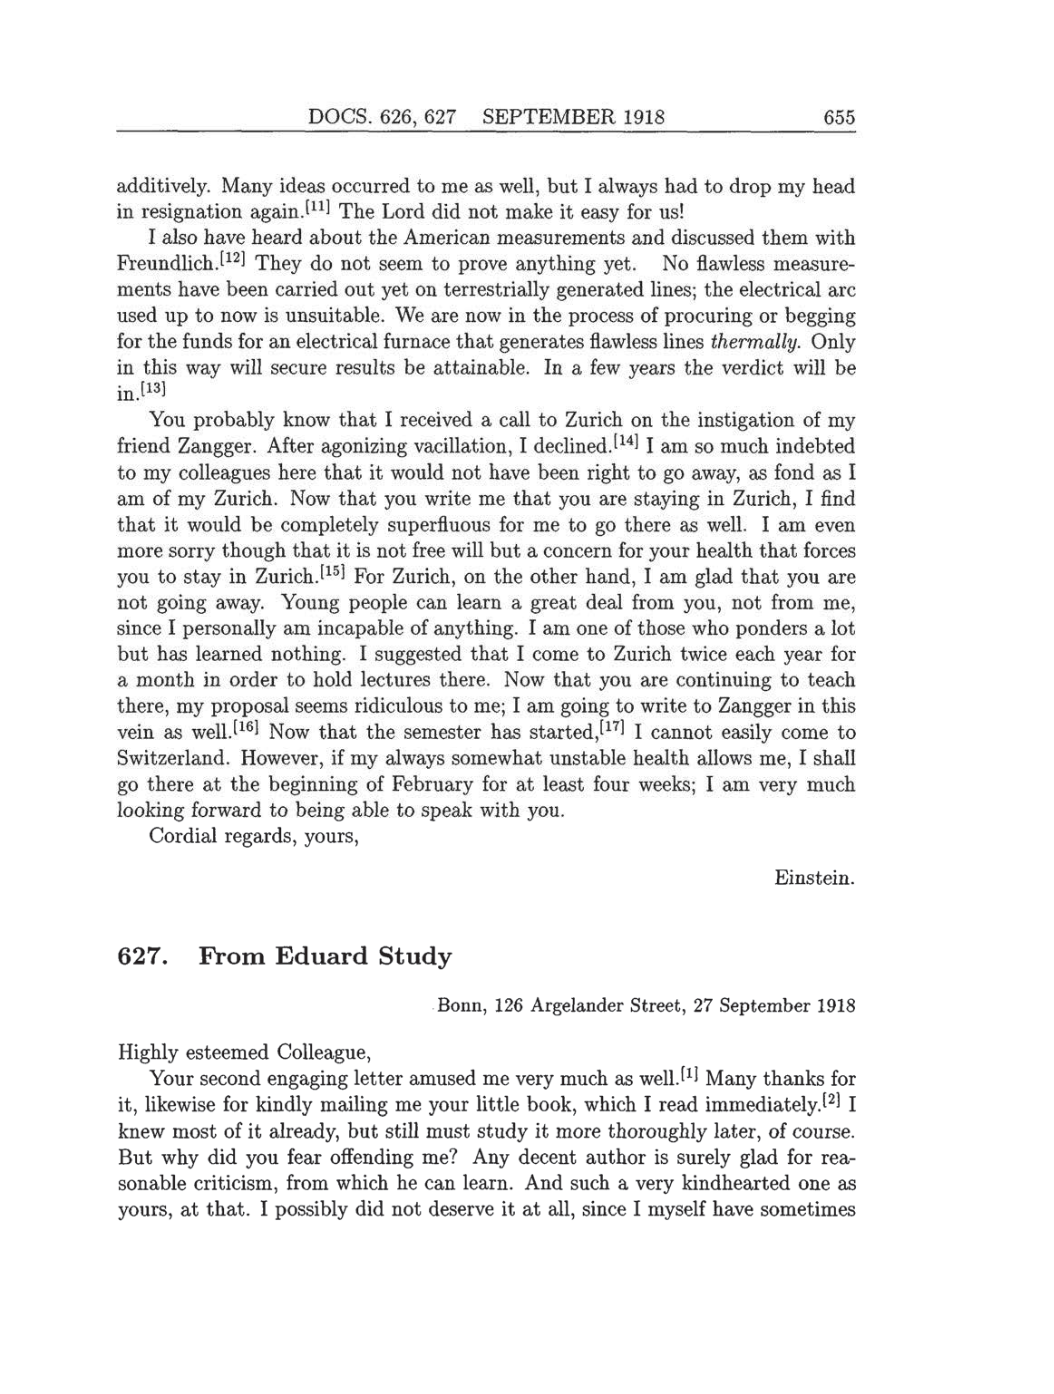 Volume 8: The Berlin Years: Correspondence, 1914-1918 (English translation supplement) page 655